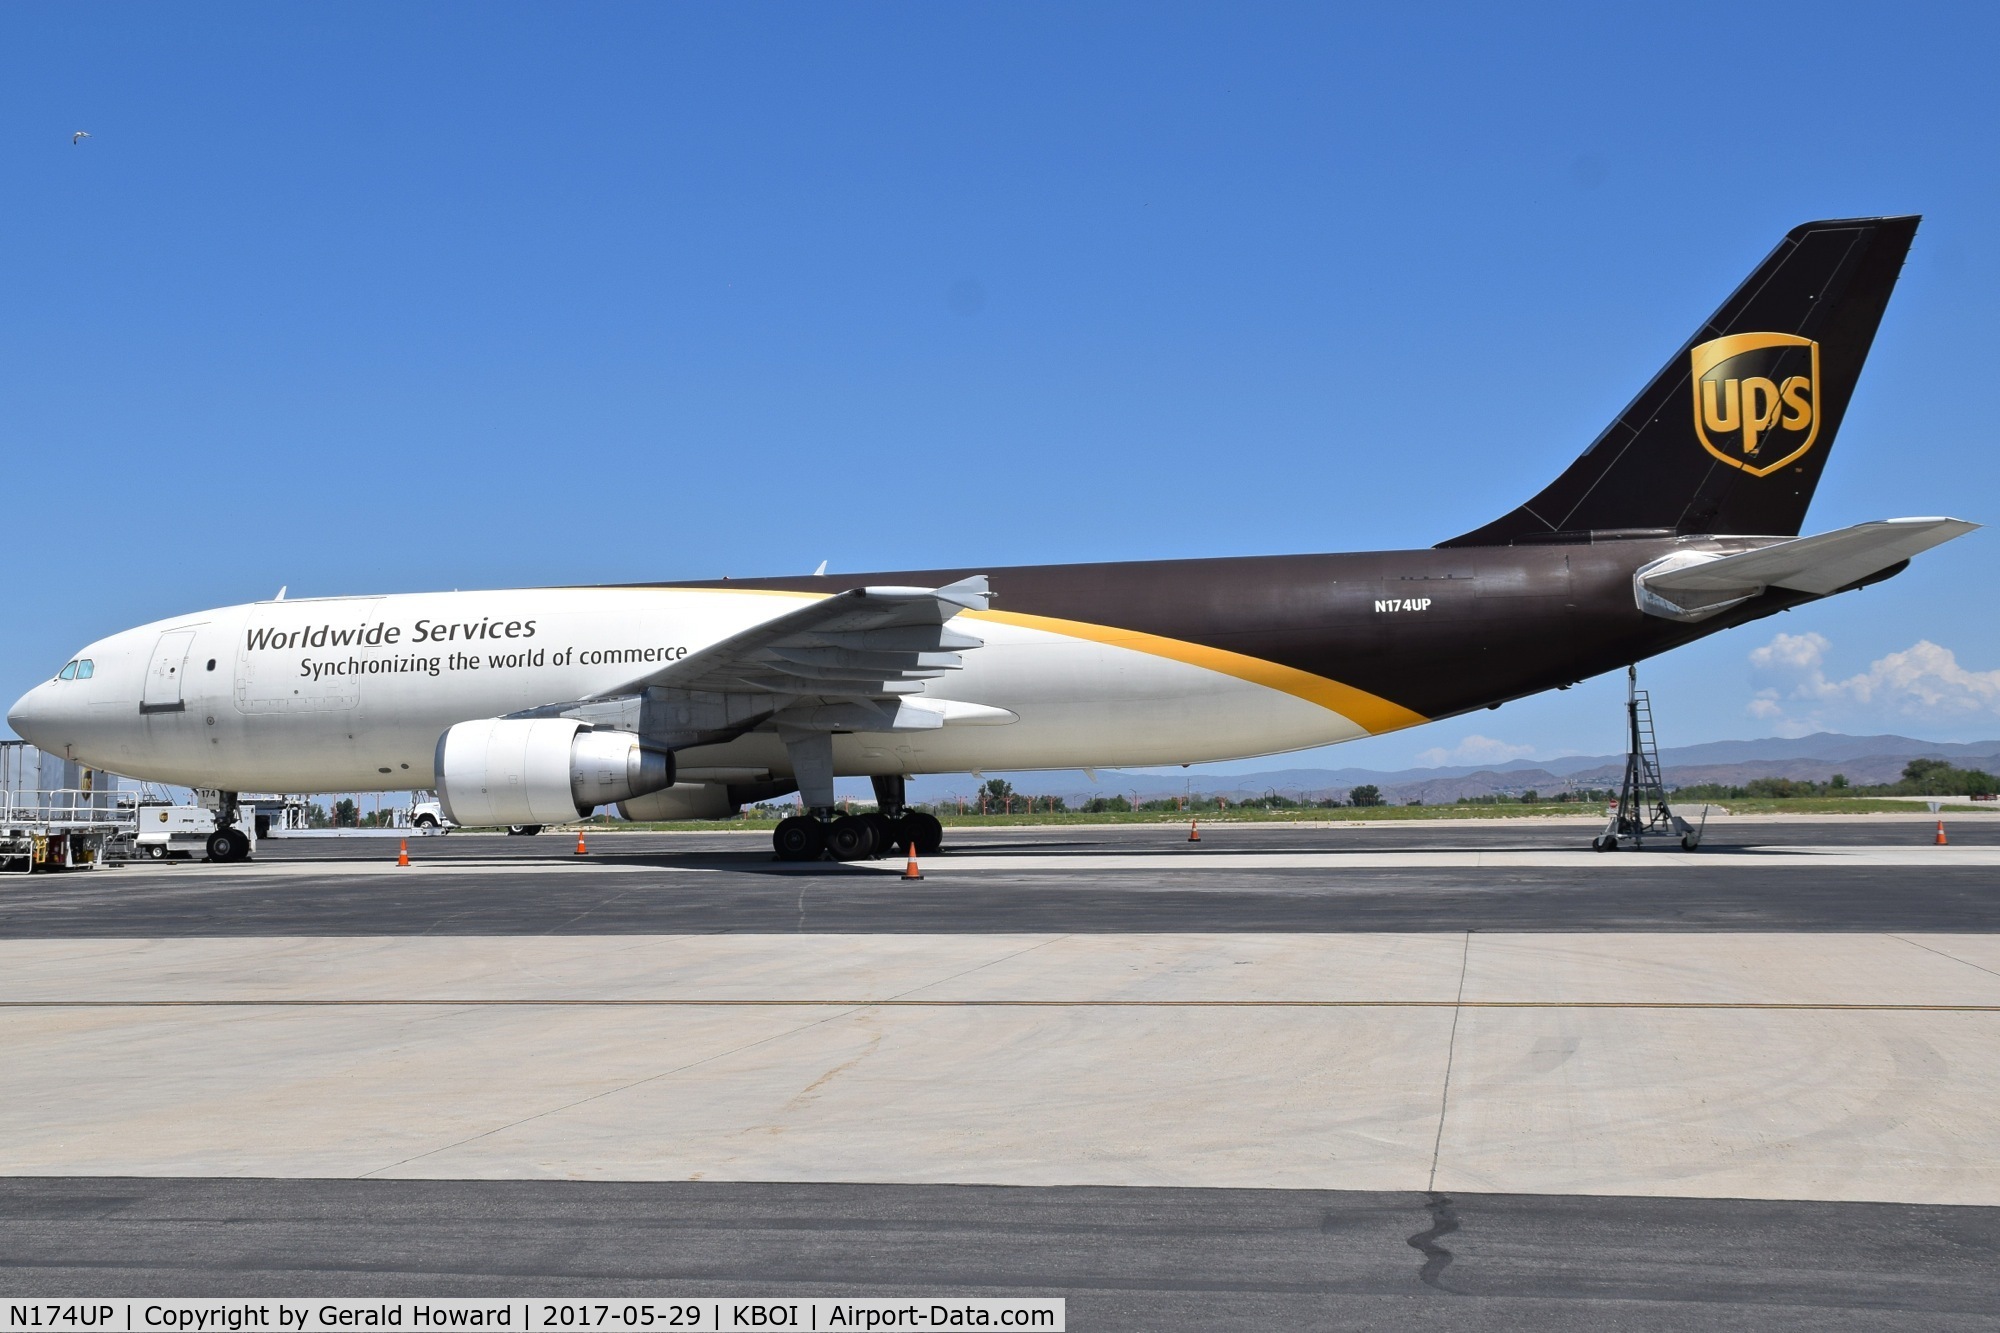 N174UP, 2006 Airbus A300F4-622R C/N 0869, Parked on the UPS ramp.